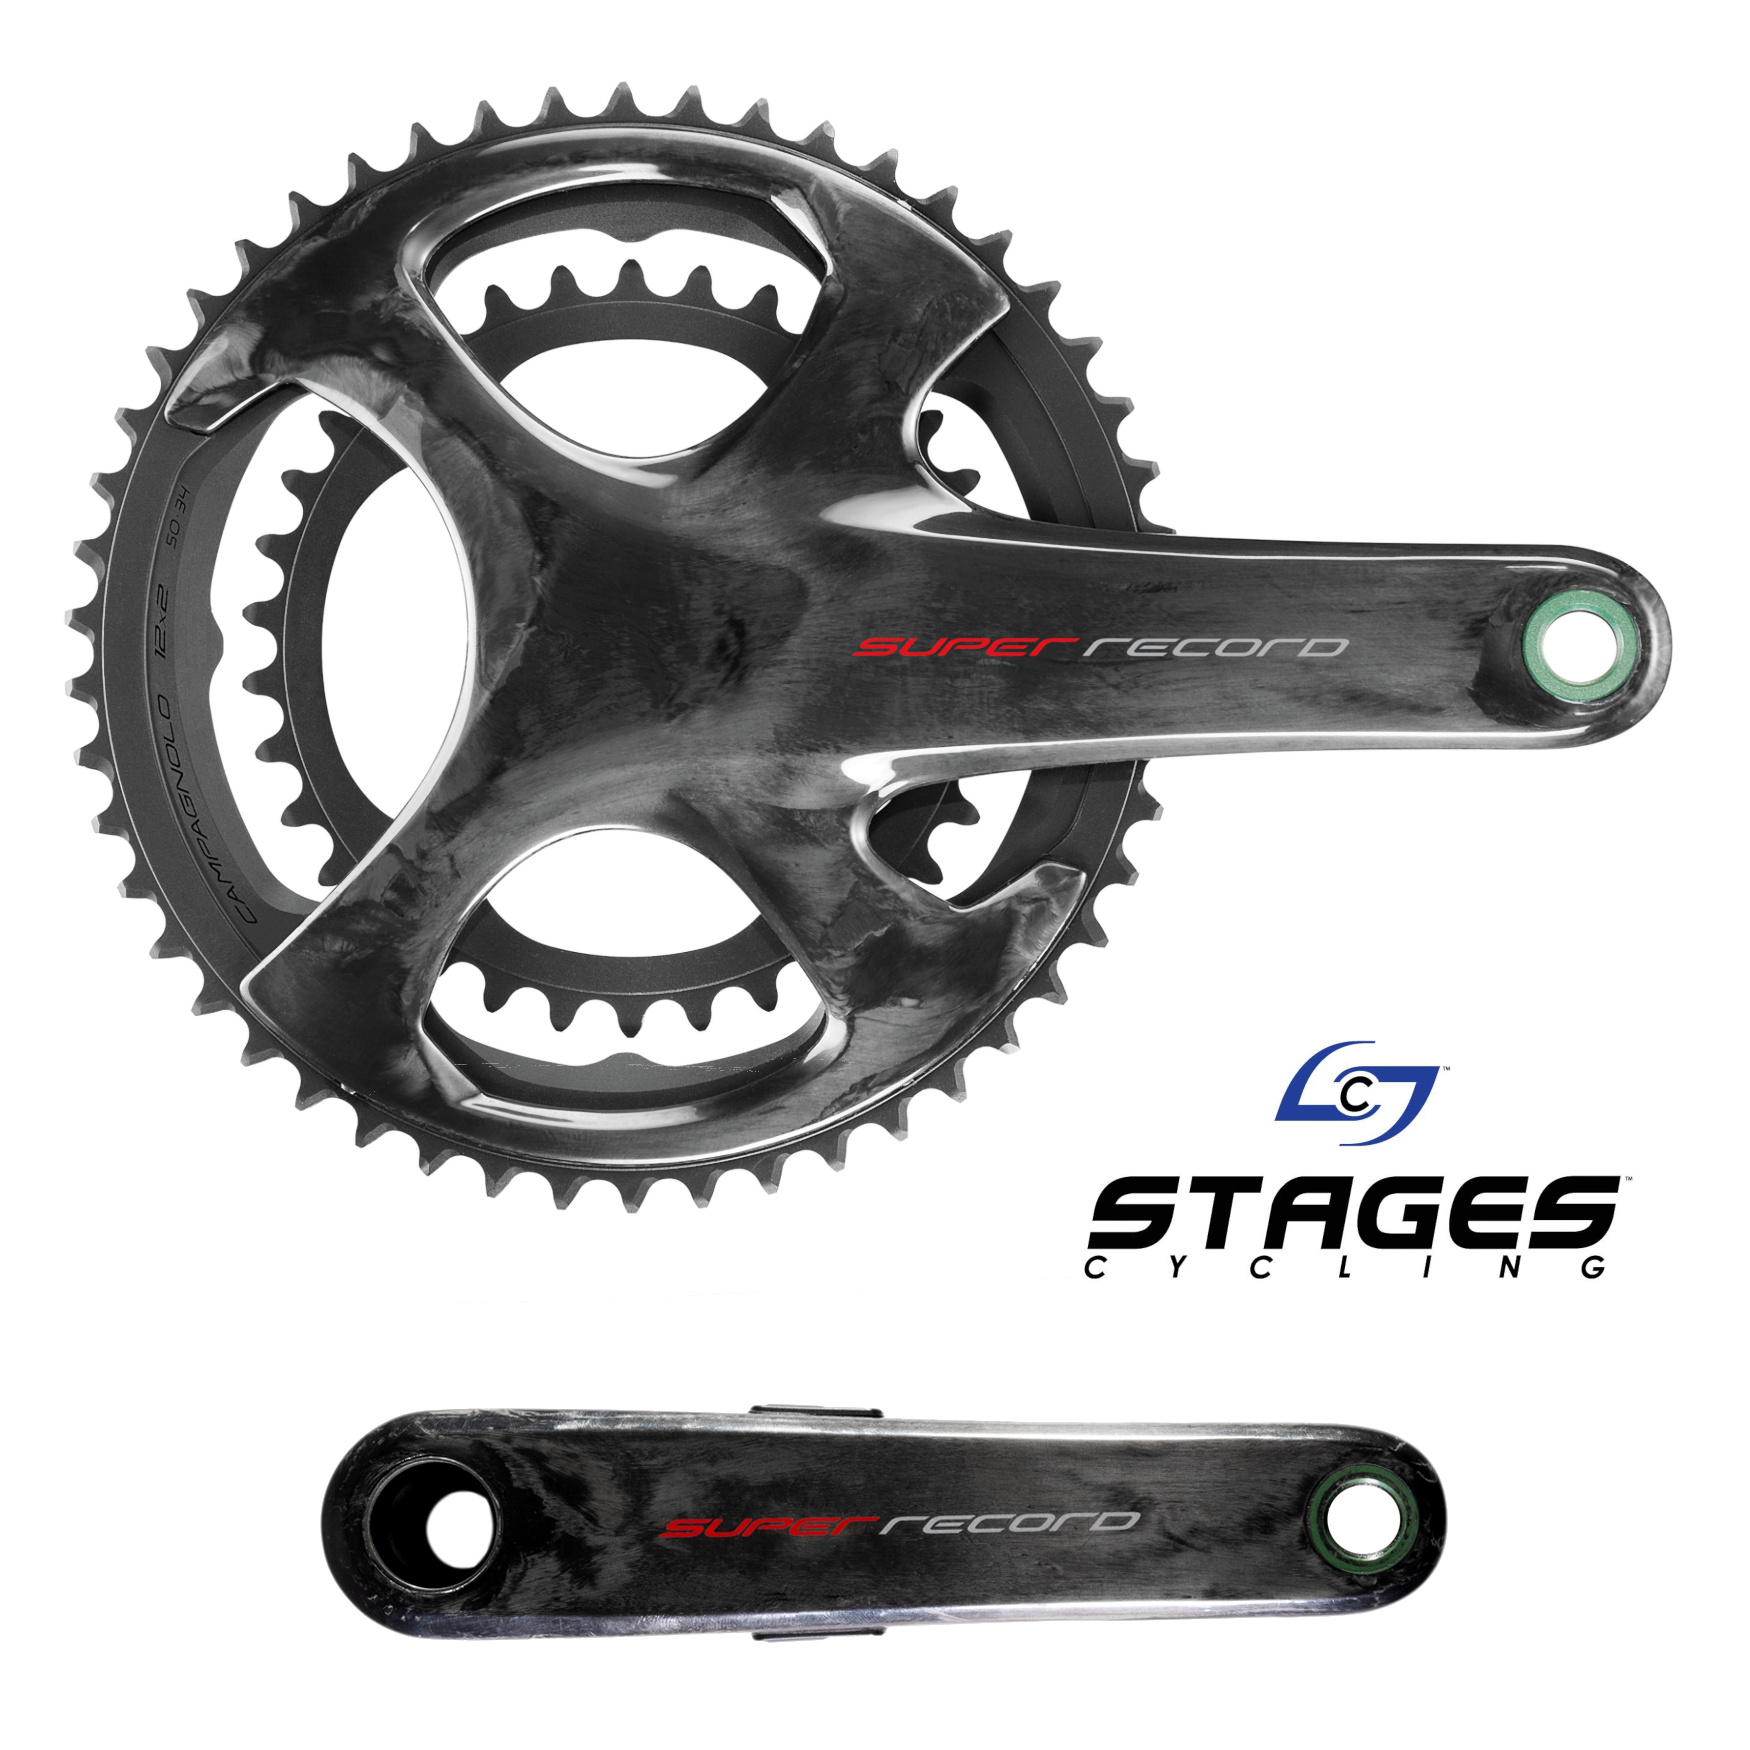 Picture of Campagnolo Super Record / Stages L Powermeter Crankset - 2x12-speed - 52/36 Teeth - 2nd Choice